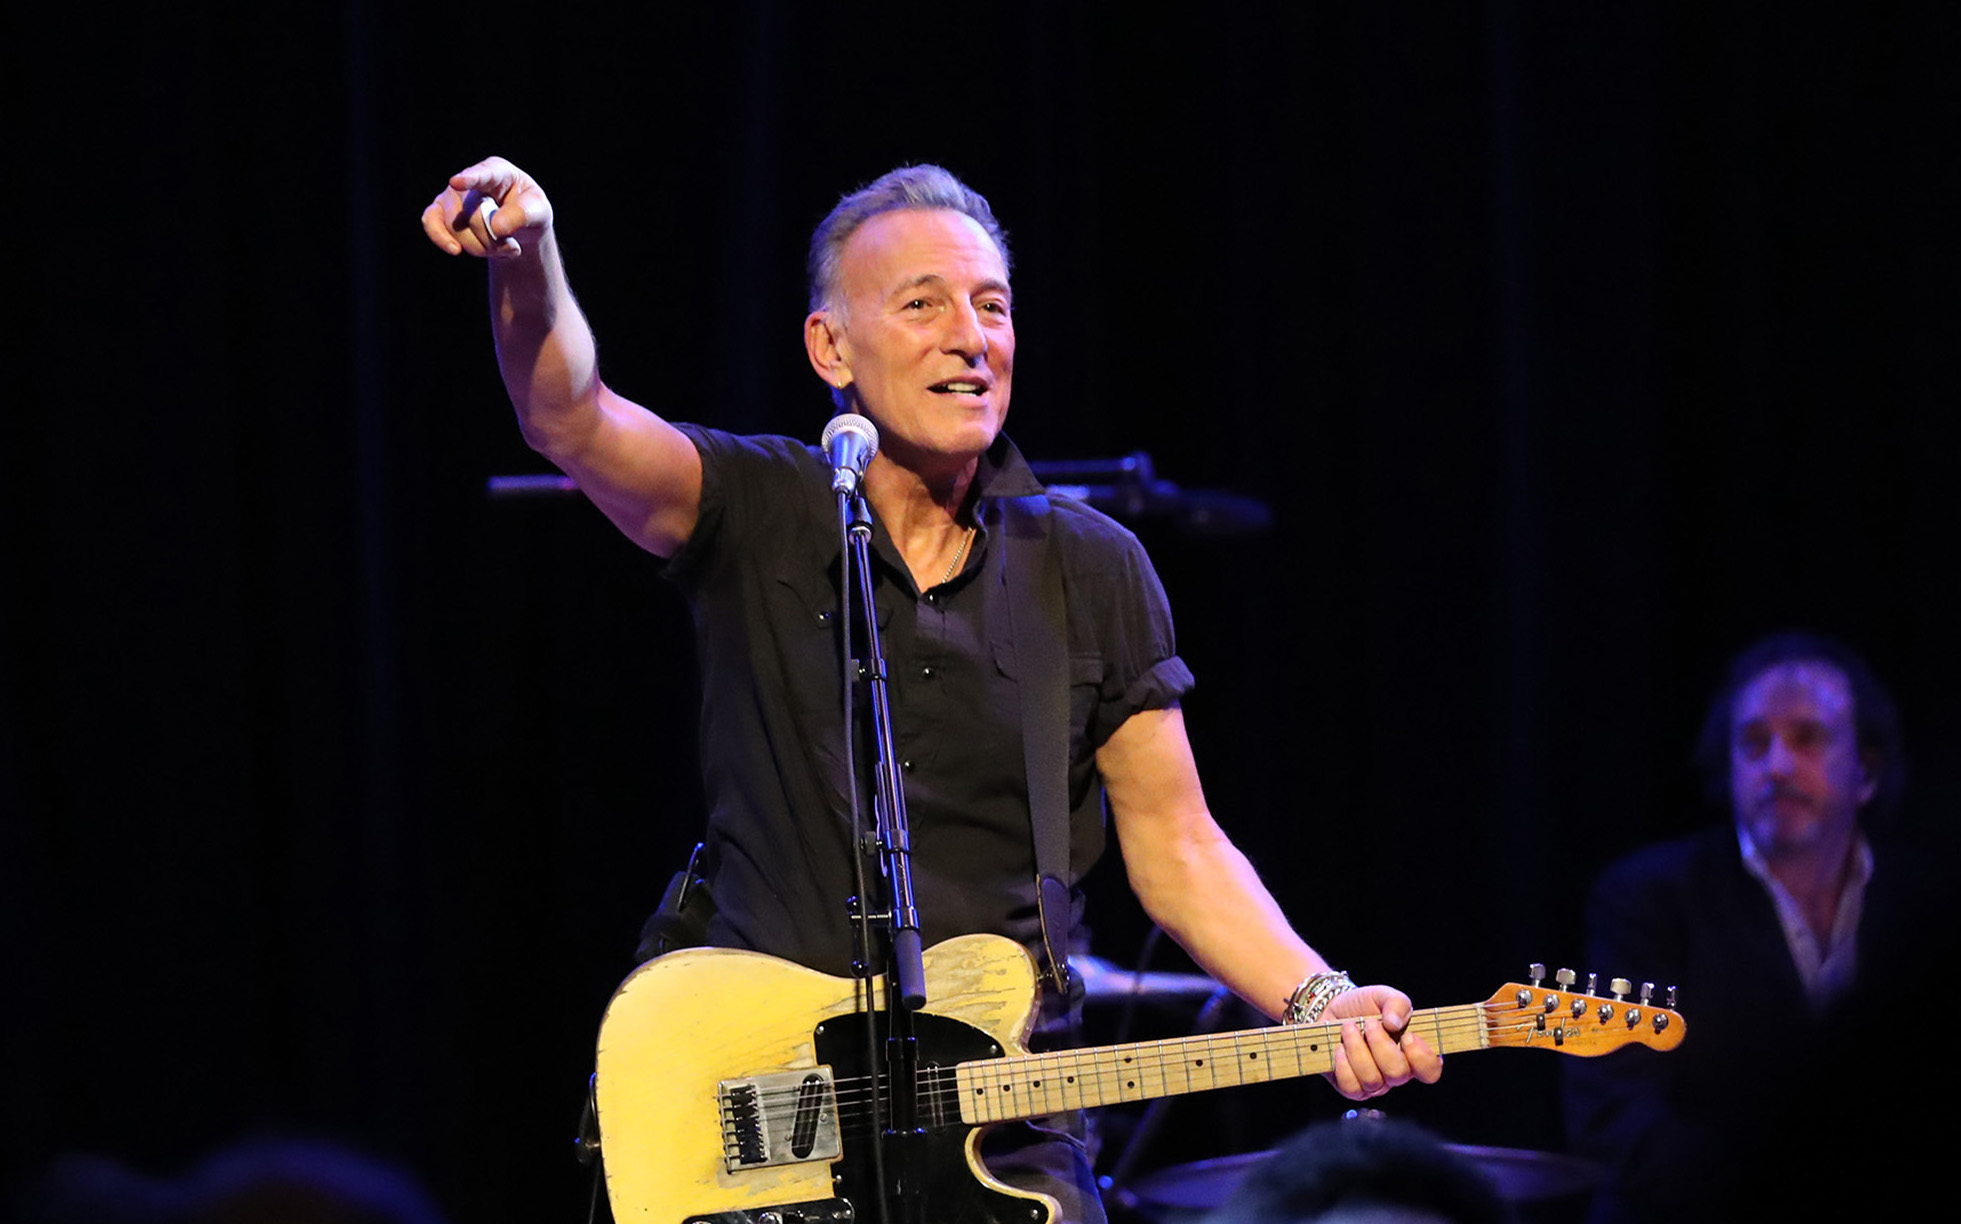 Bruce Springsteen’s latest appearance is generating a lot of buzz